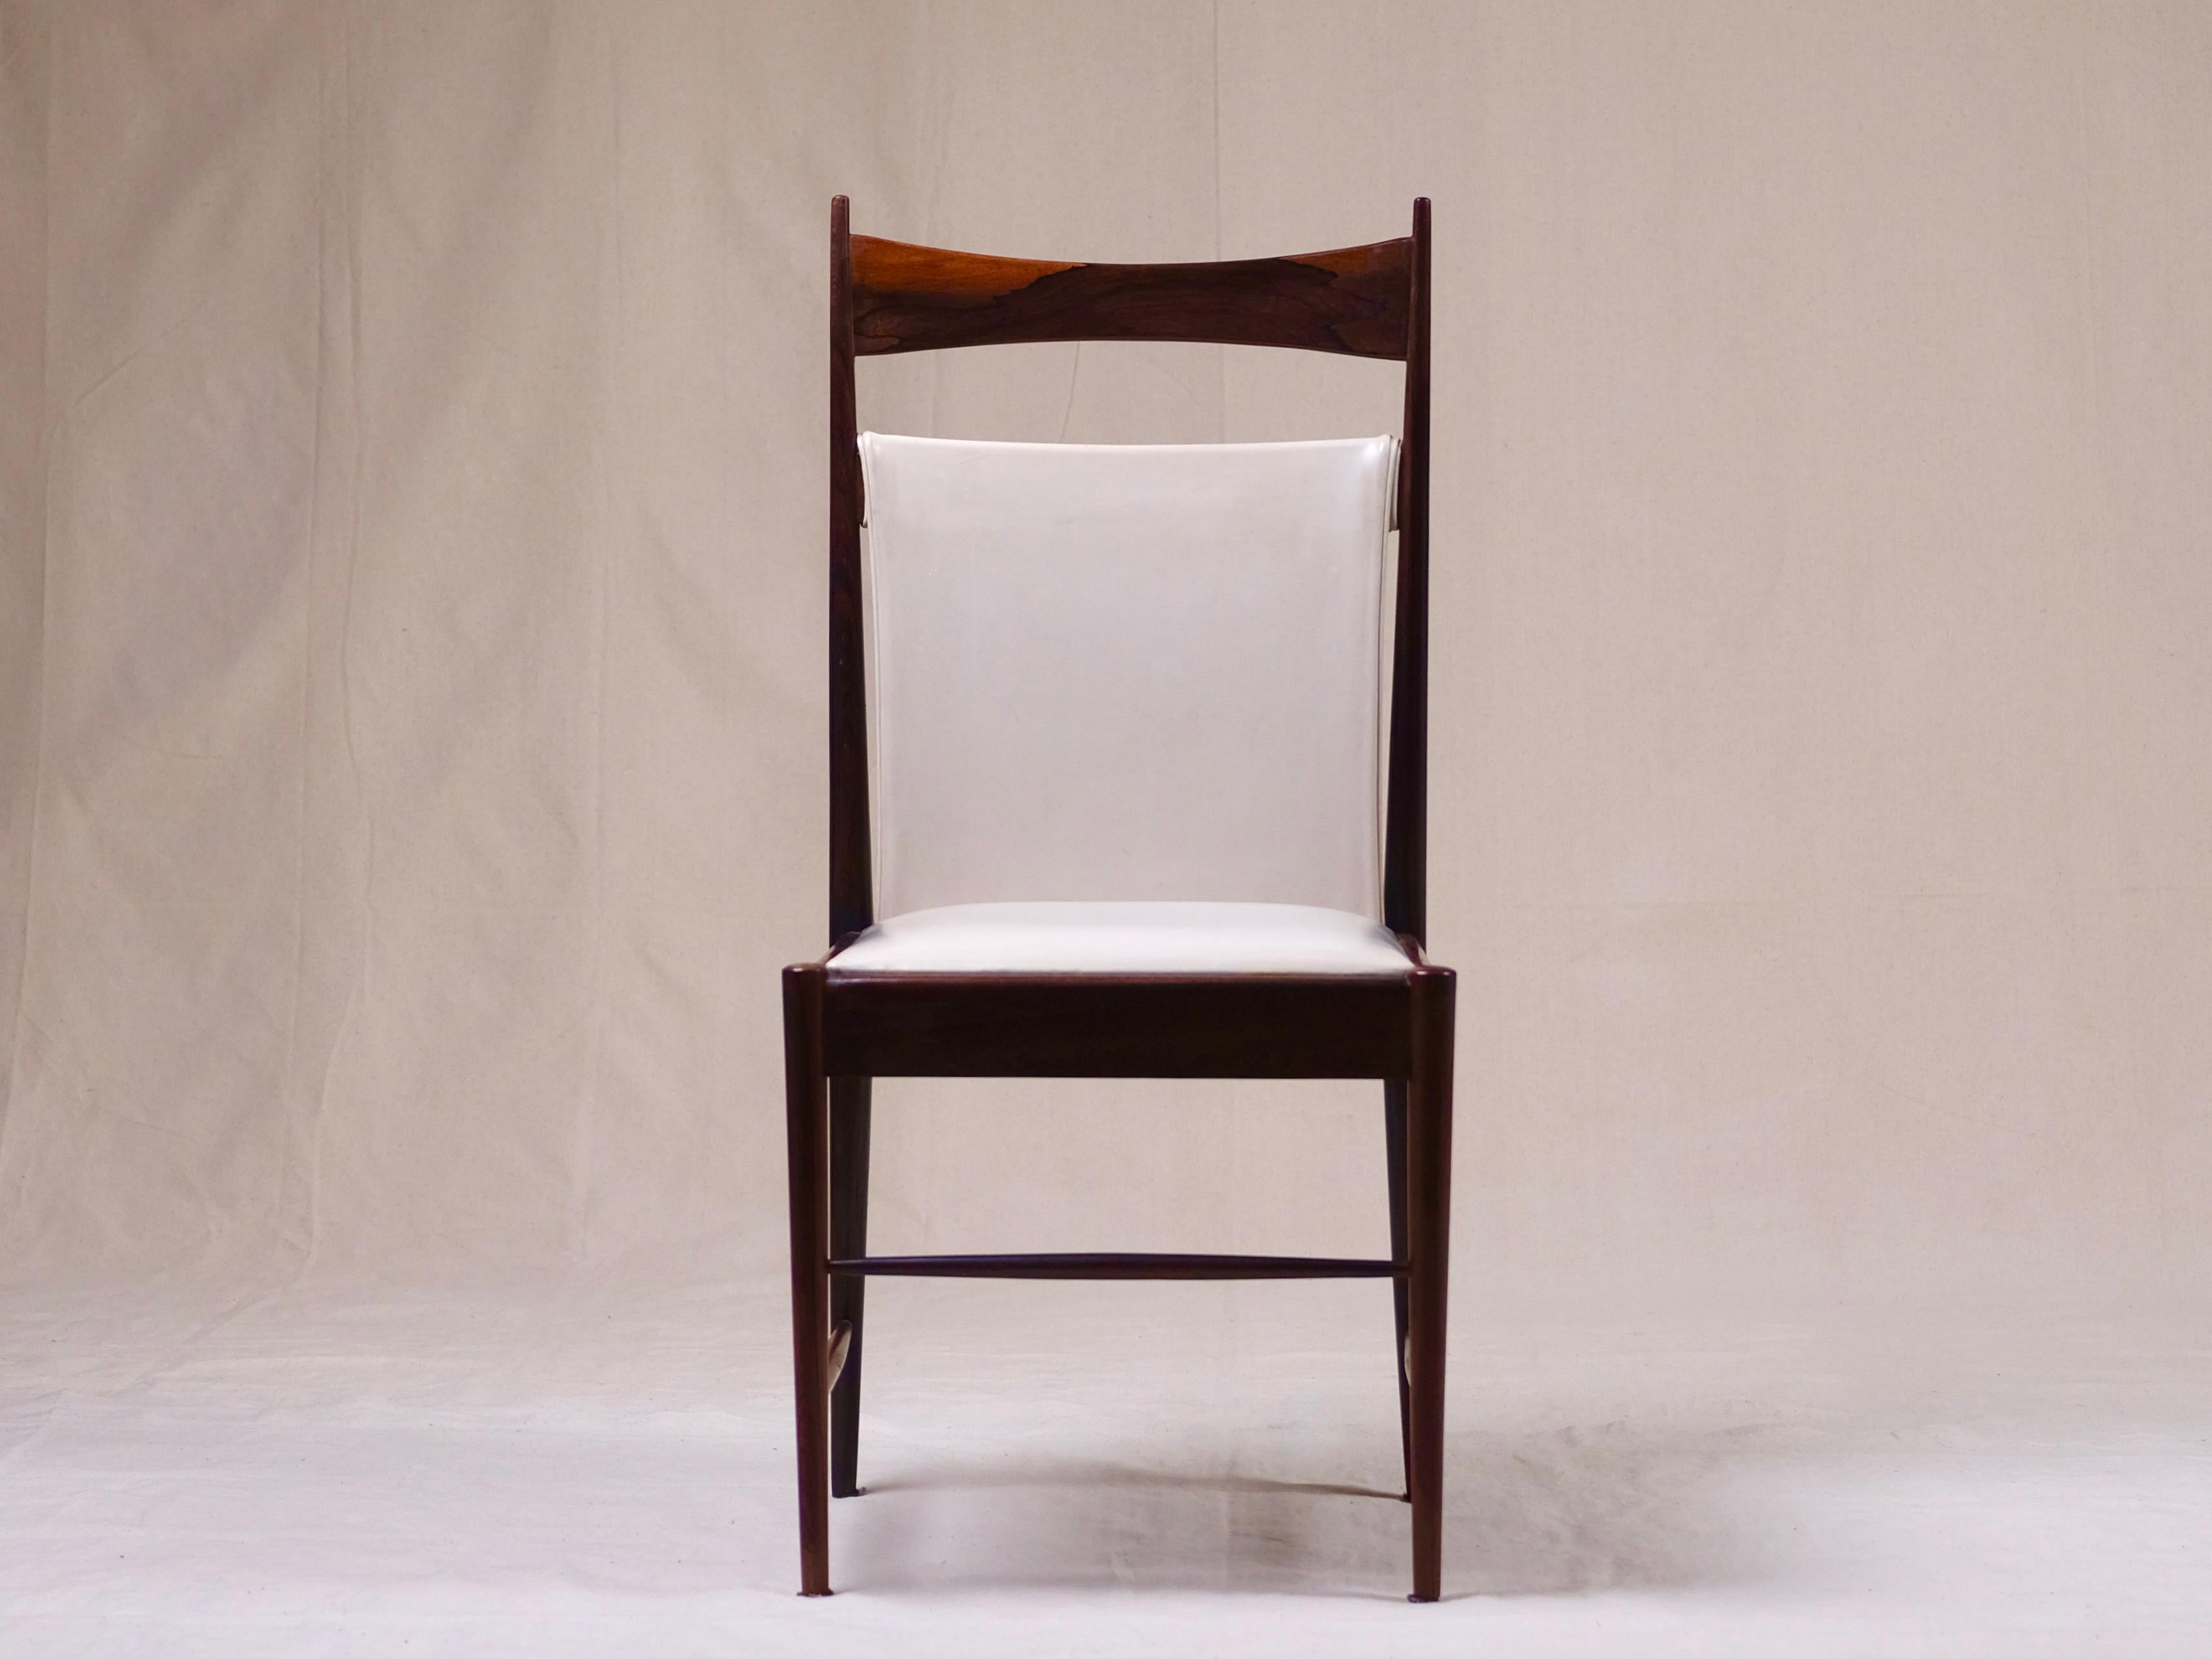 A set of 8 original & wonderfully elegant High-back ‘Cantu’ chairs by Sergio Rodrigues, for OCA in 1959 Brazil.

These are the rare originals & not the recent reissues.

This set comes with the two larger seated chairs to go at each end of the